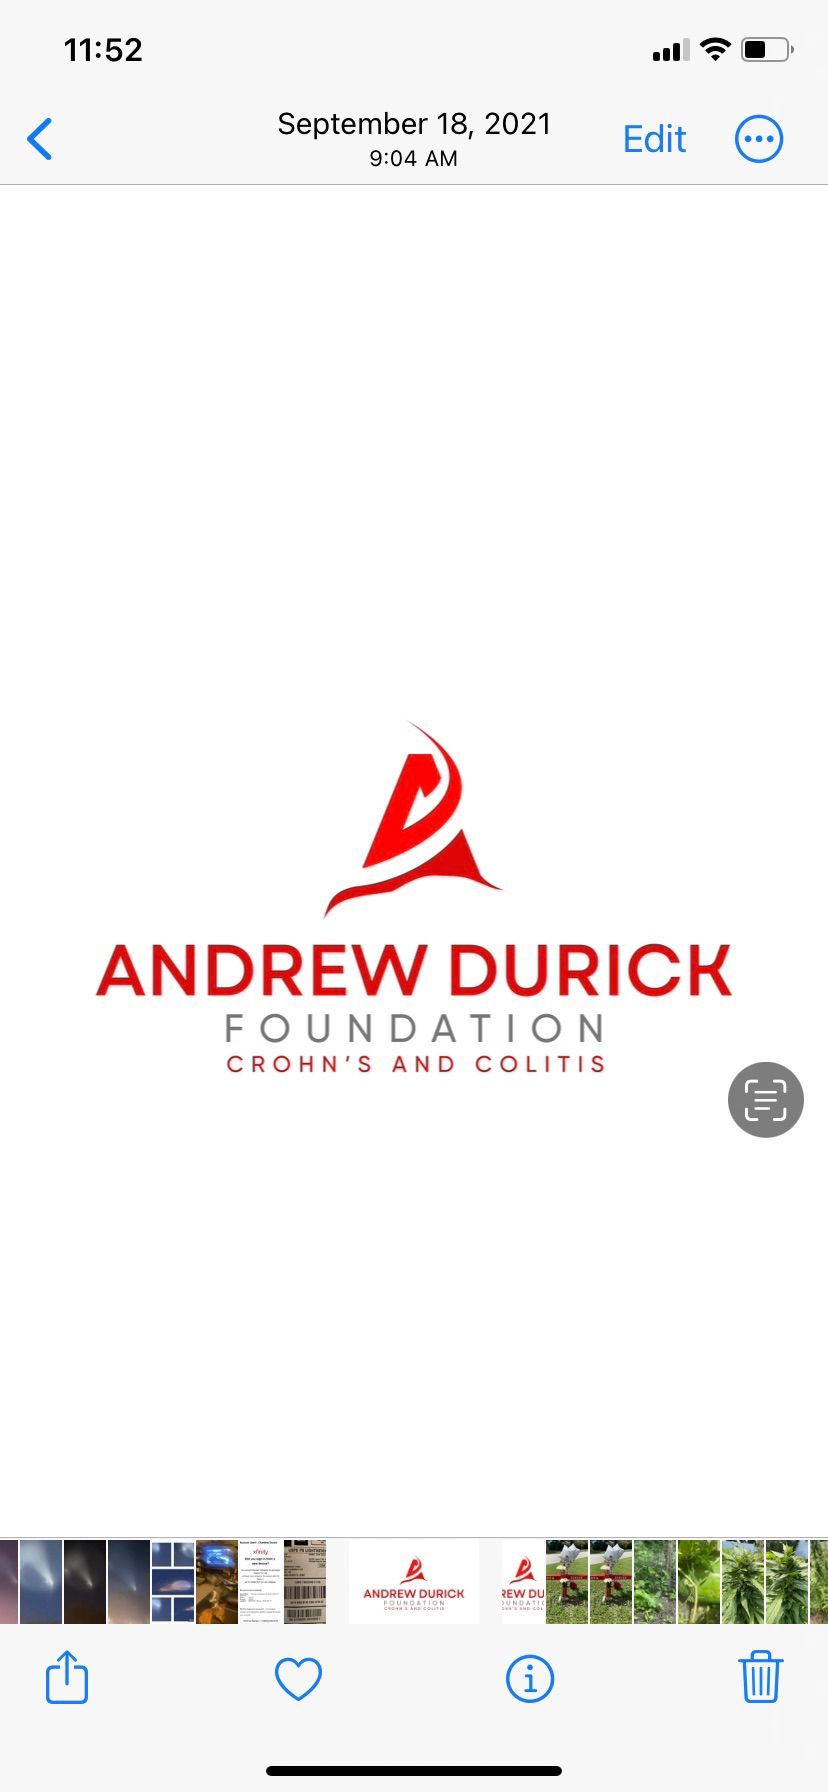 Andrew Durick Foundation 3rd Annual Bowl-A-Thon